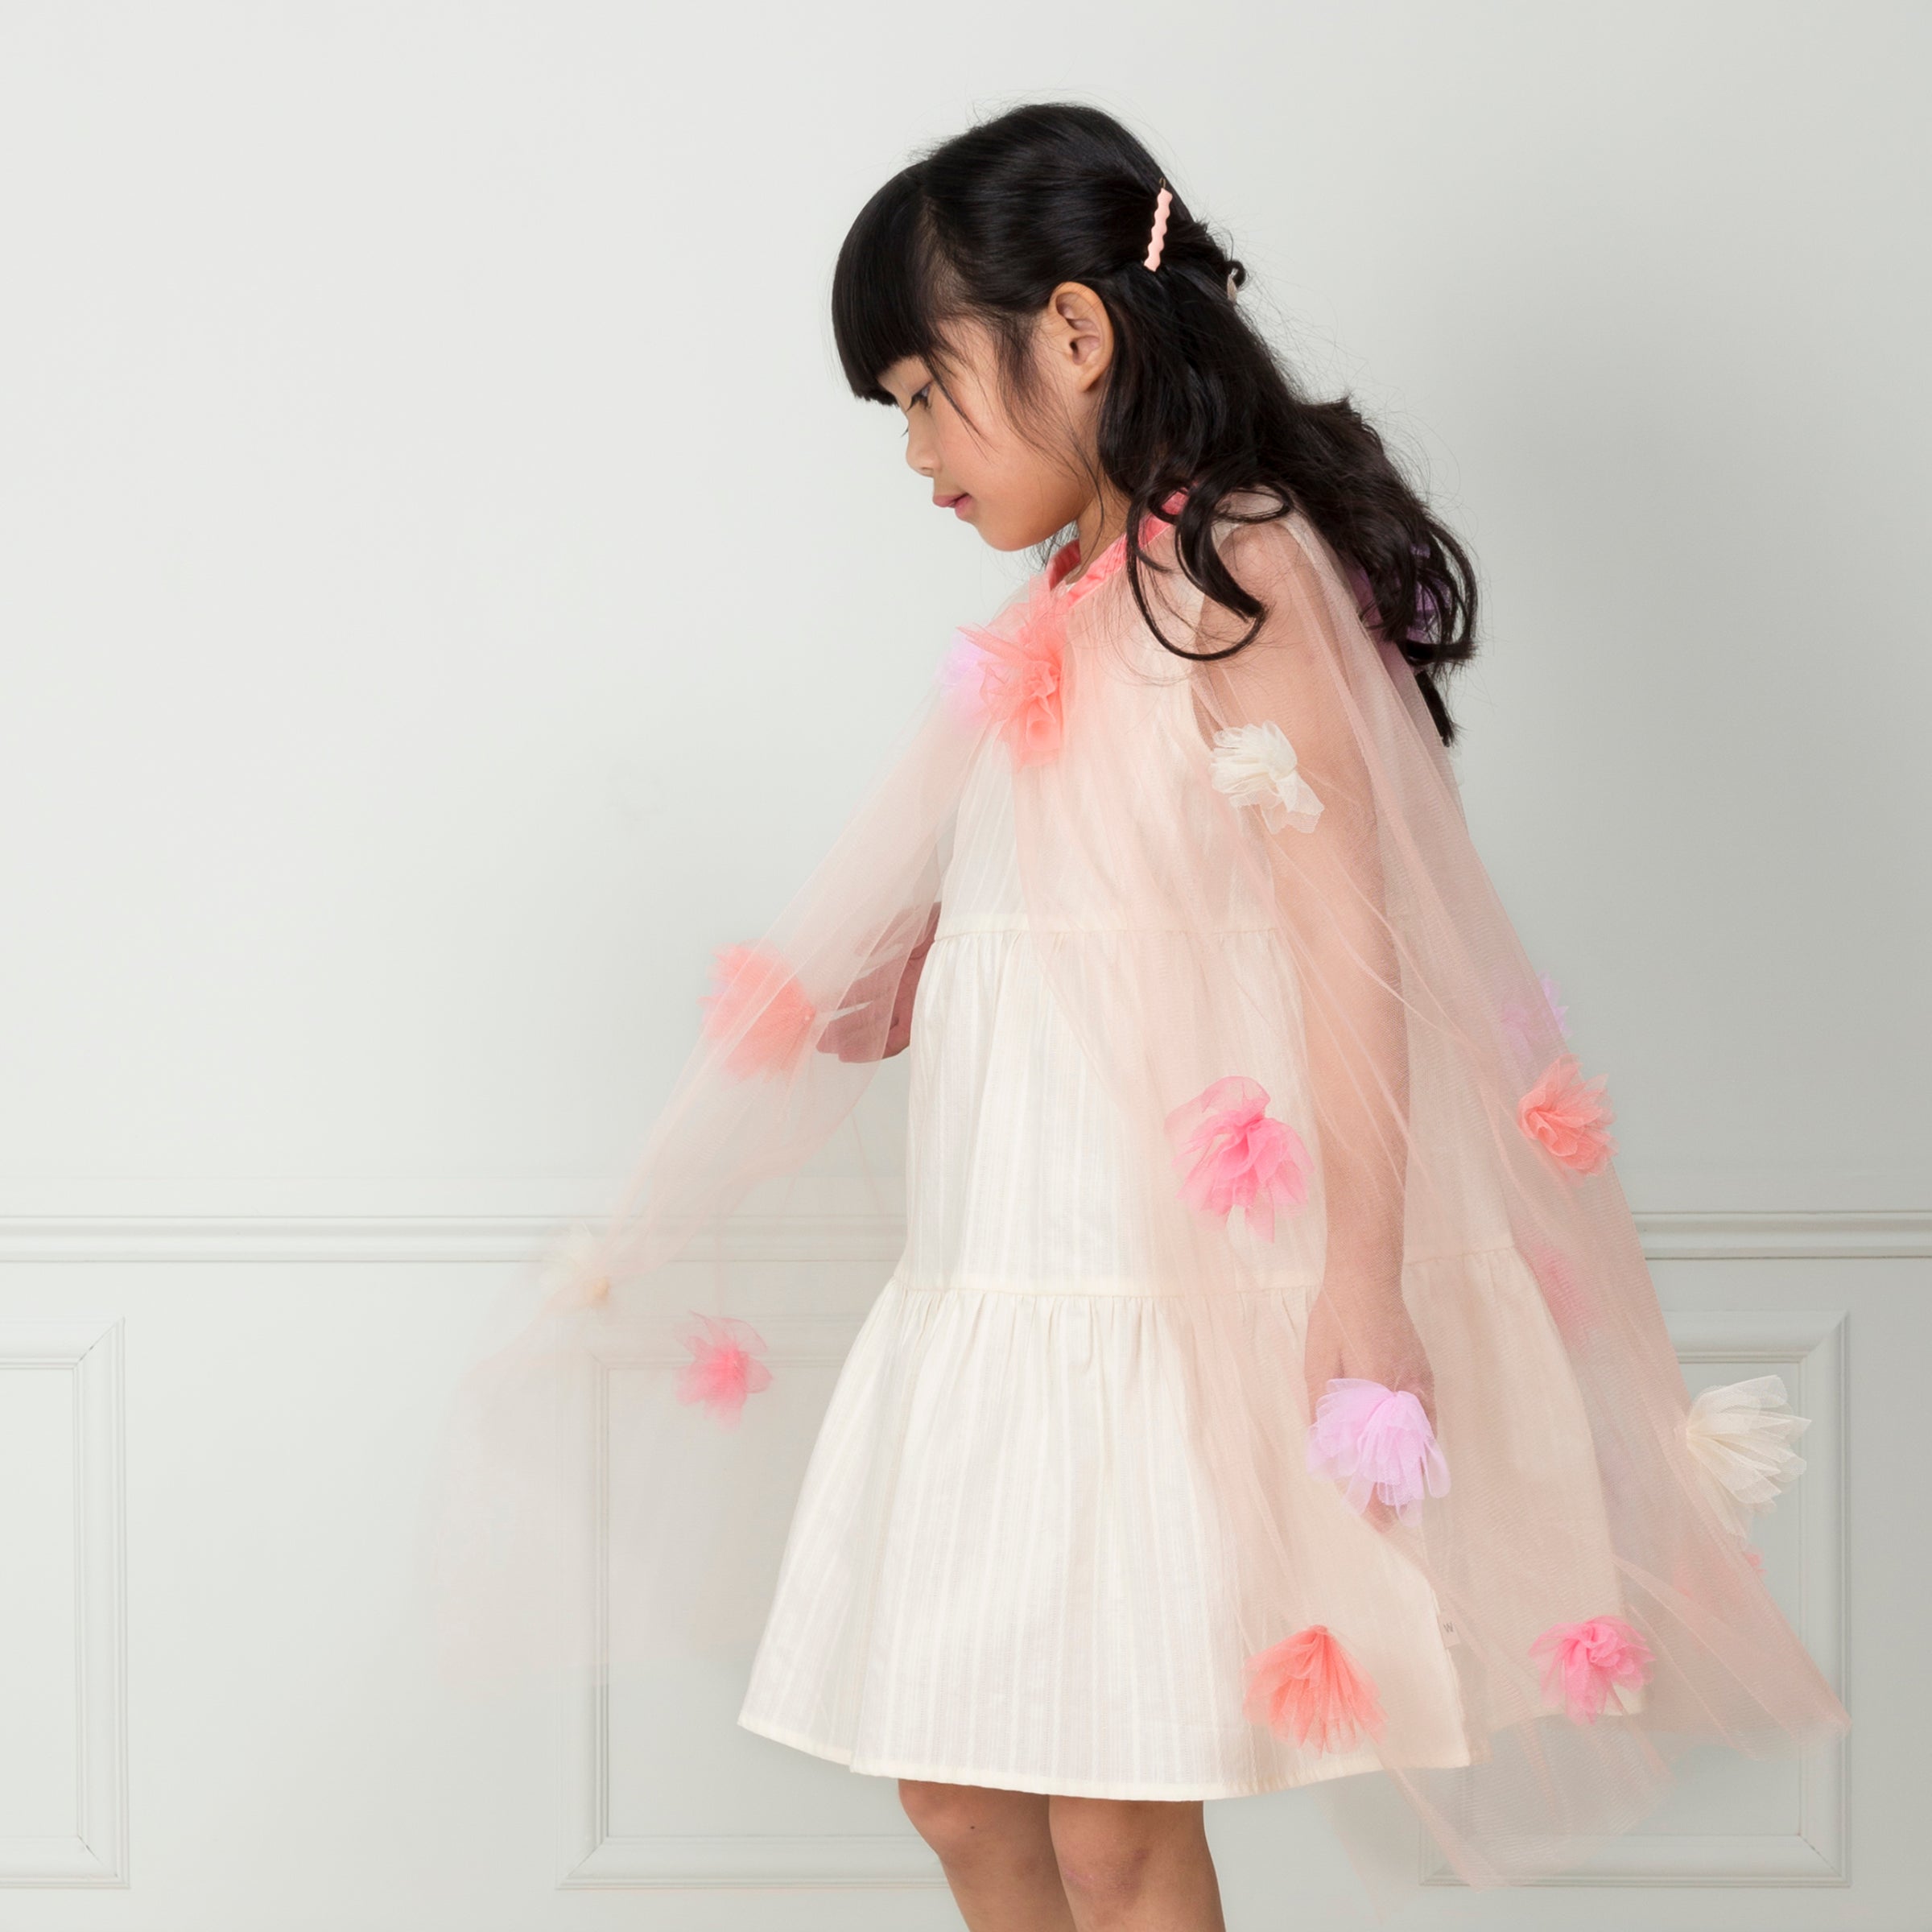 Our kids cape is crafted from tulle with tulle flower embellishments.